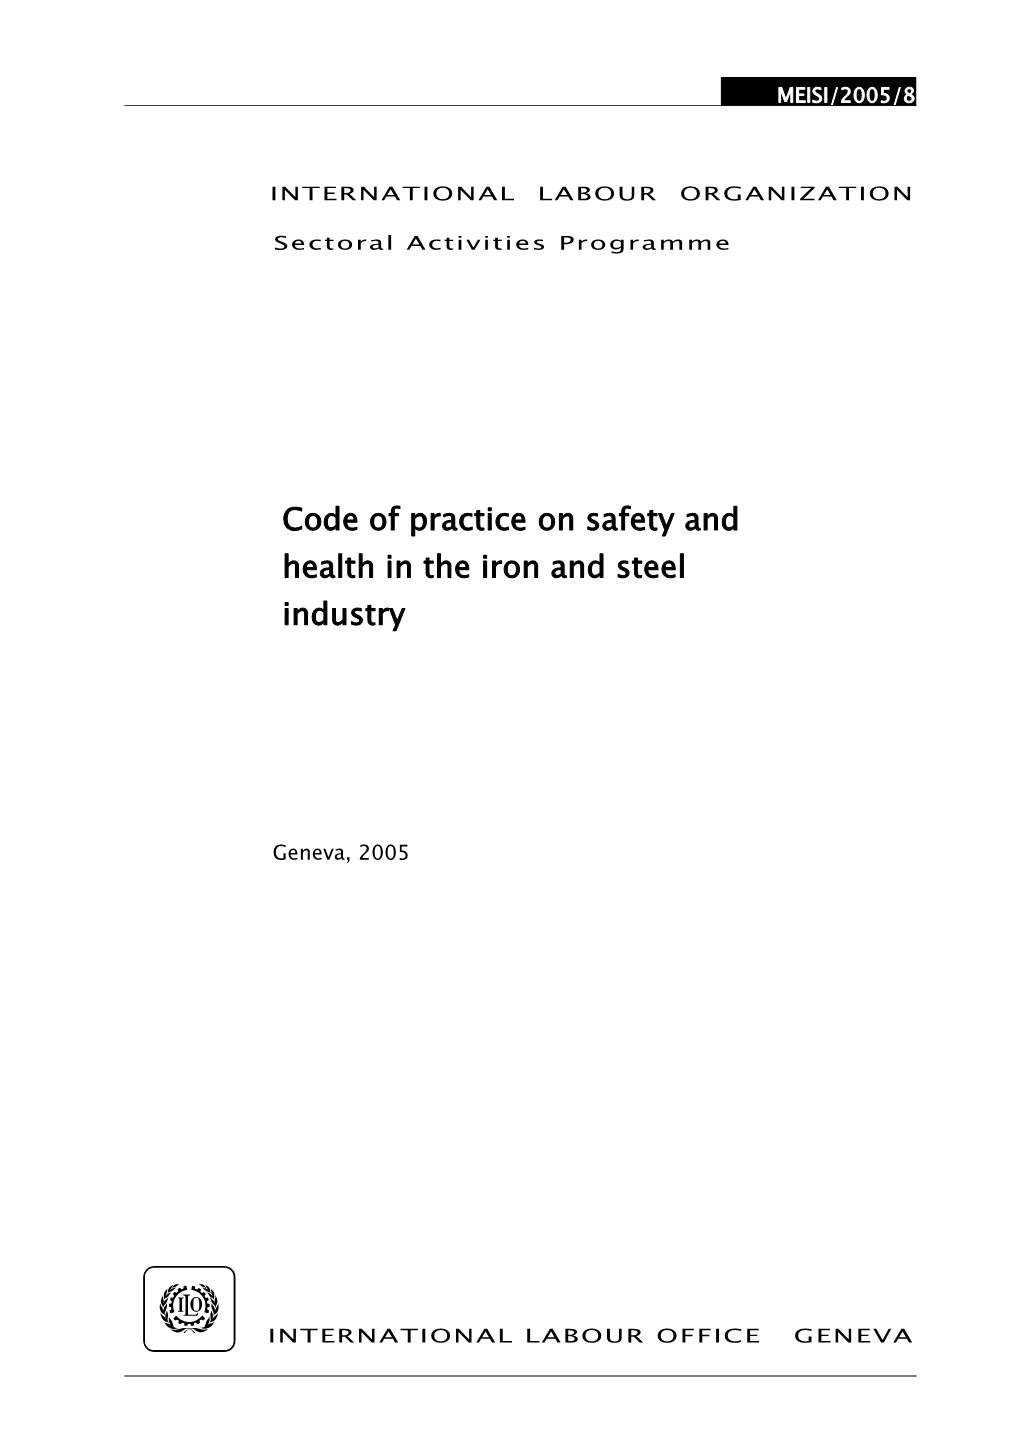 Code of Practice on Safety and Health in the Iron and Steel Industry